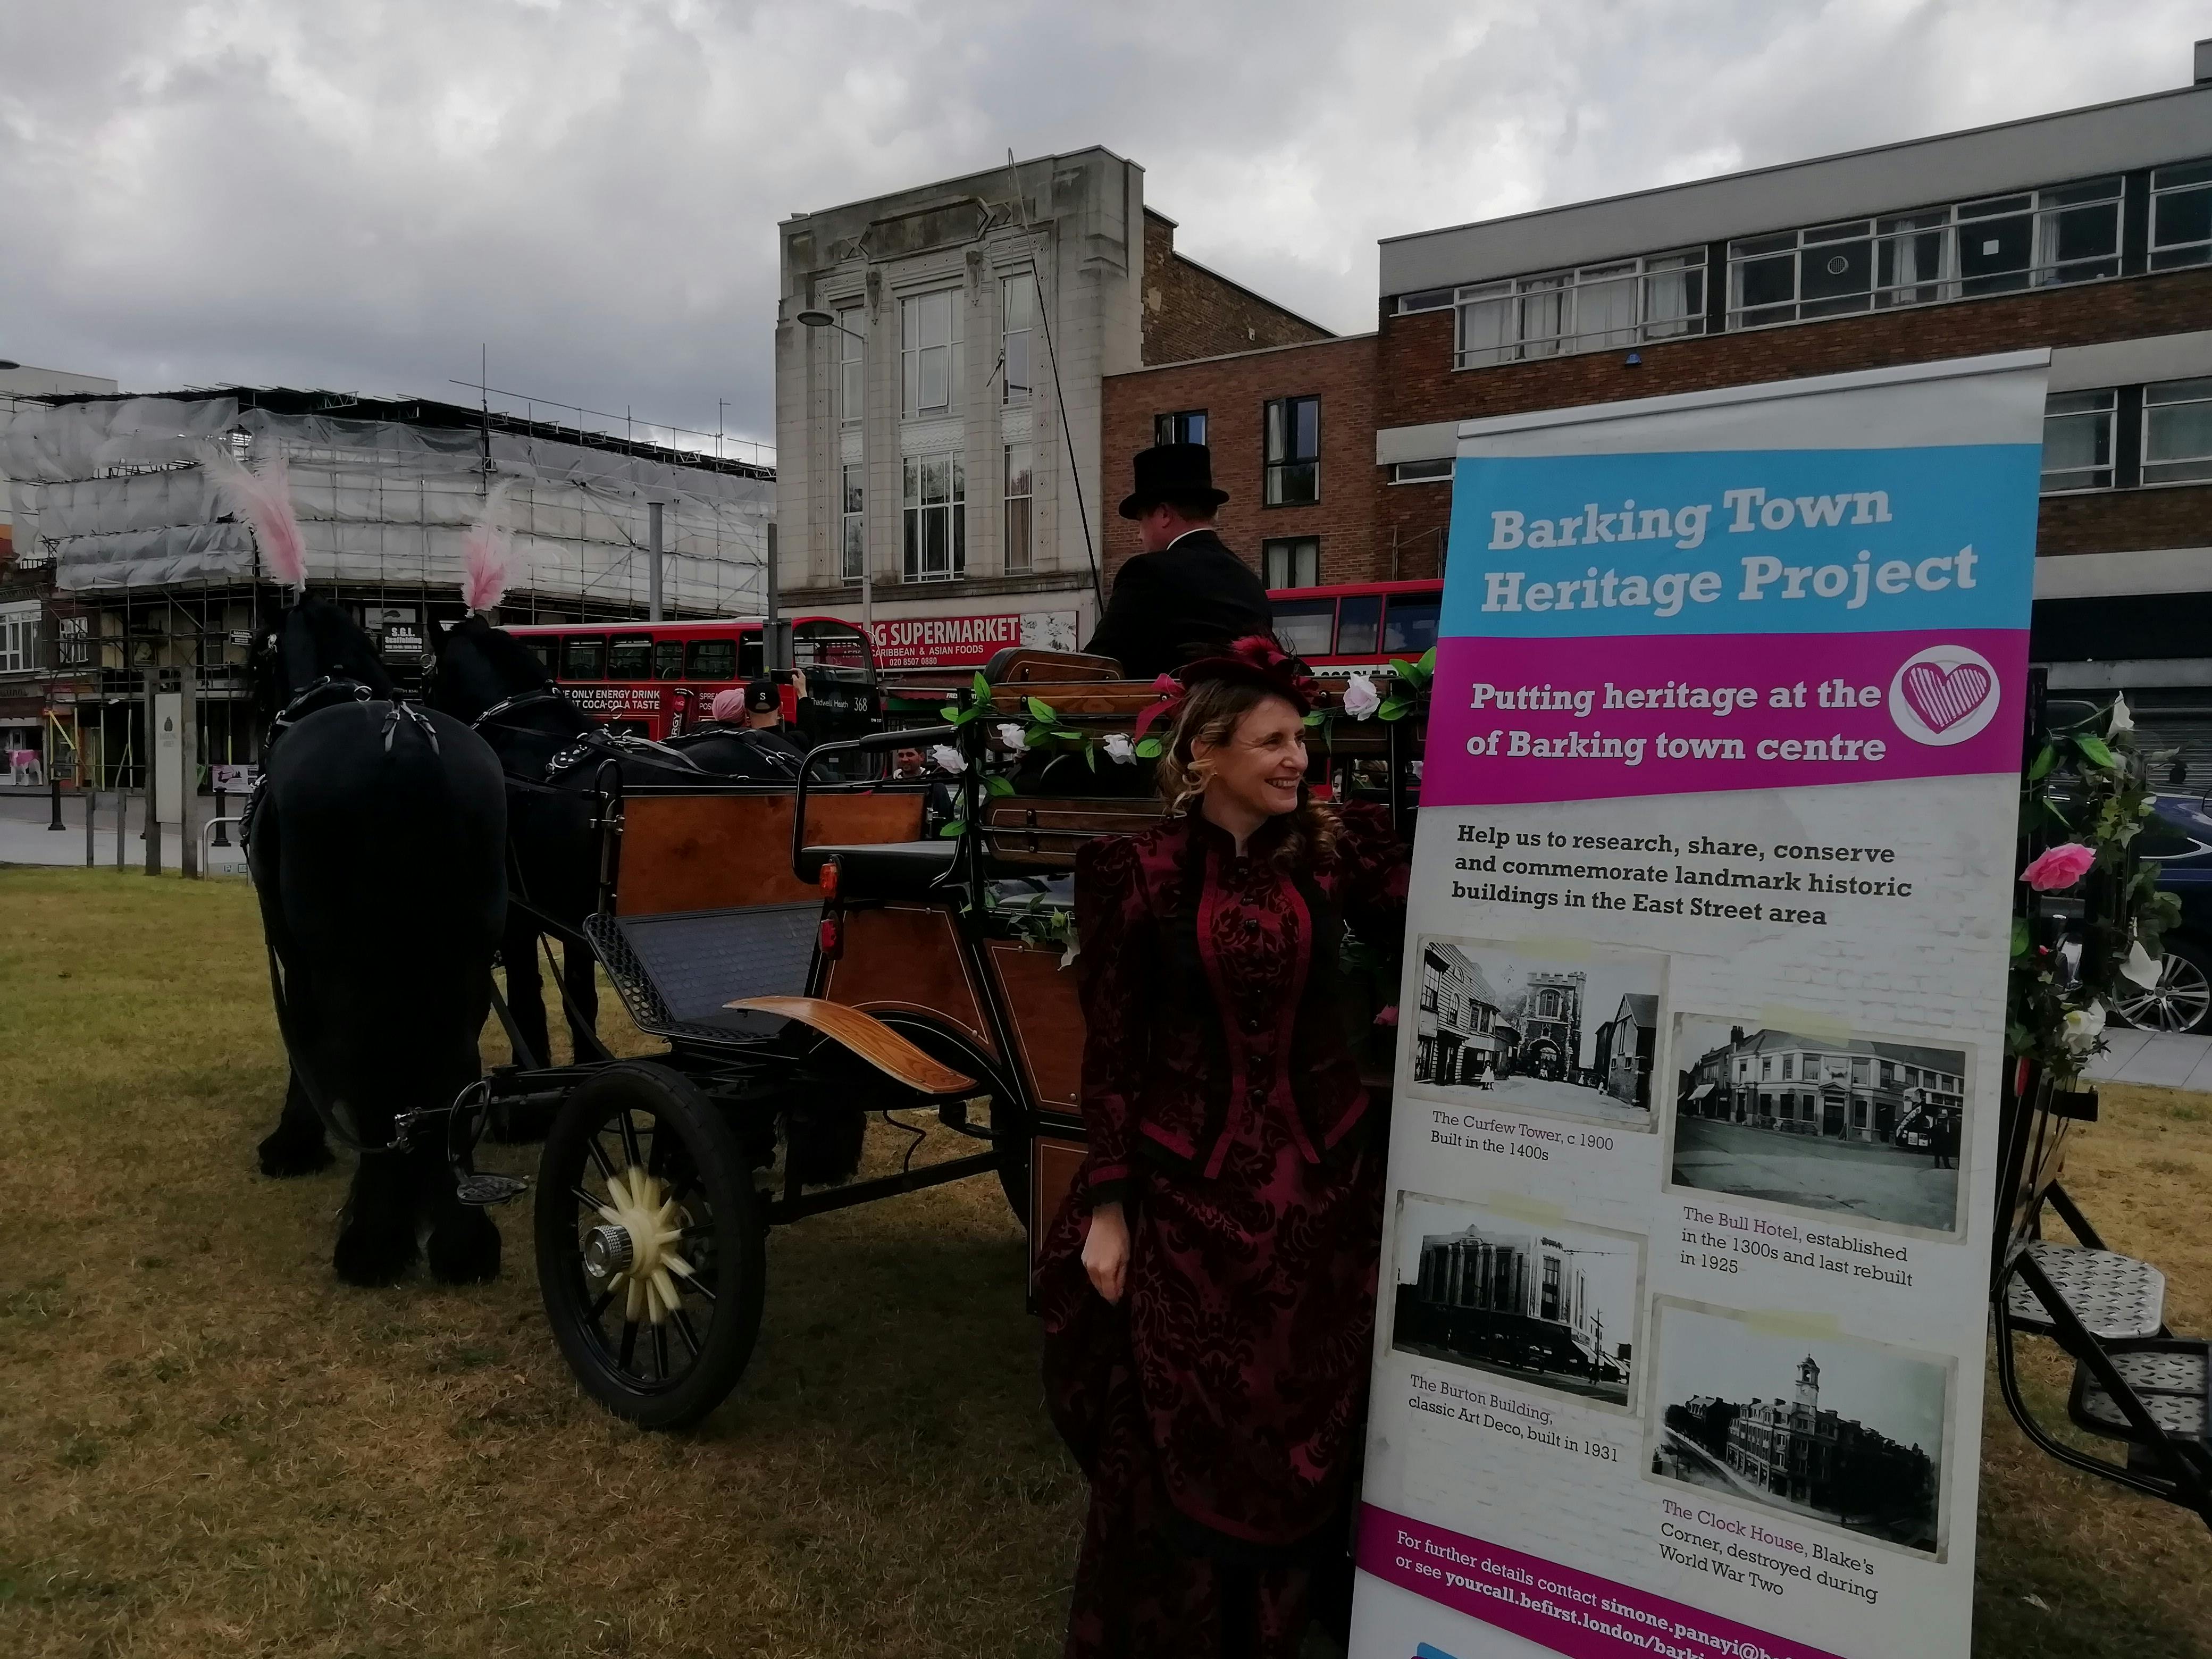 Barking Folk Festival with heritage horse and carriage